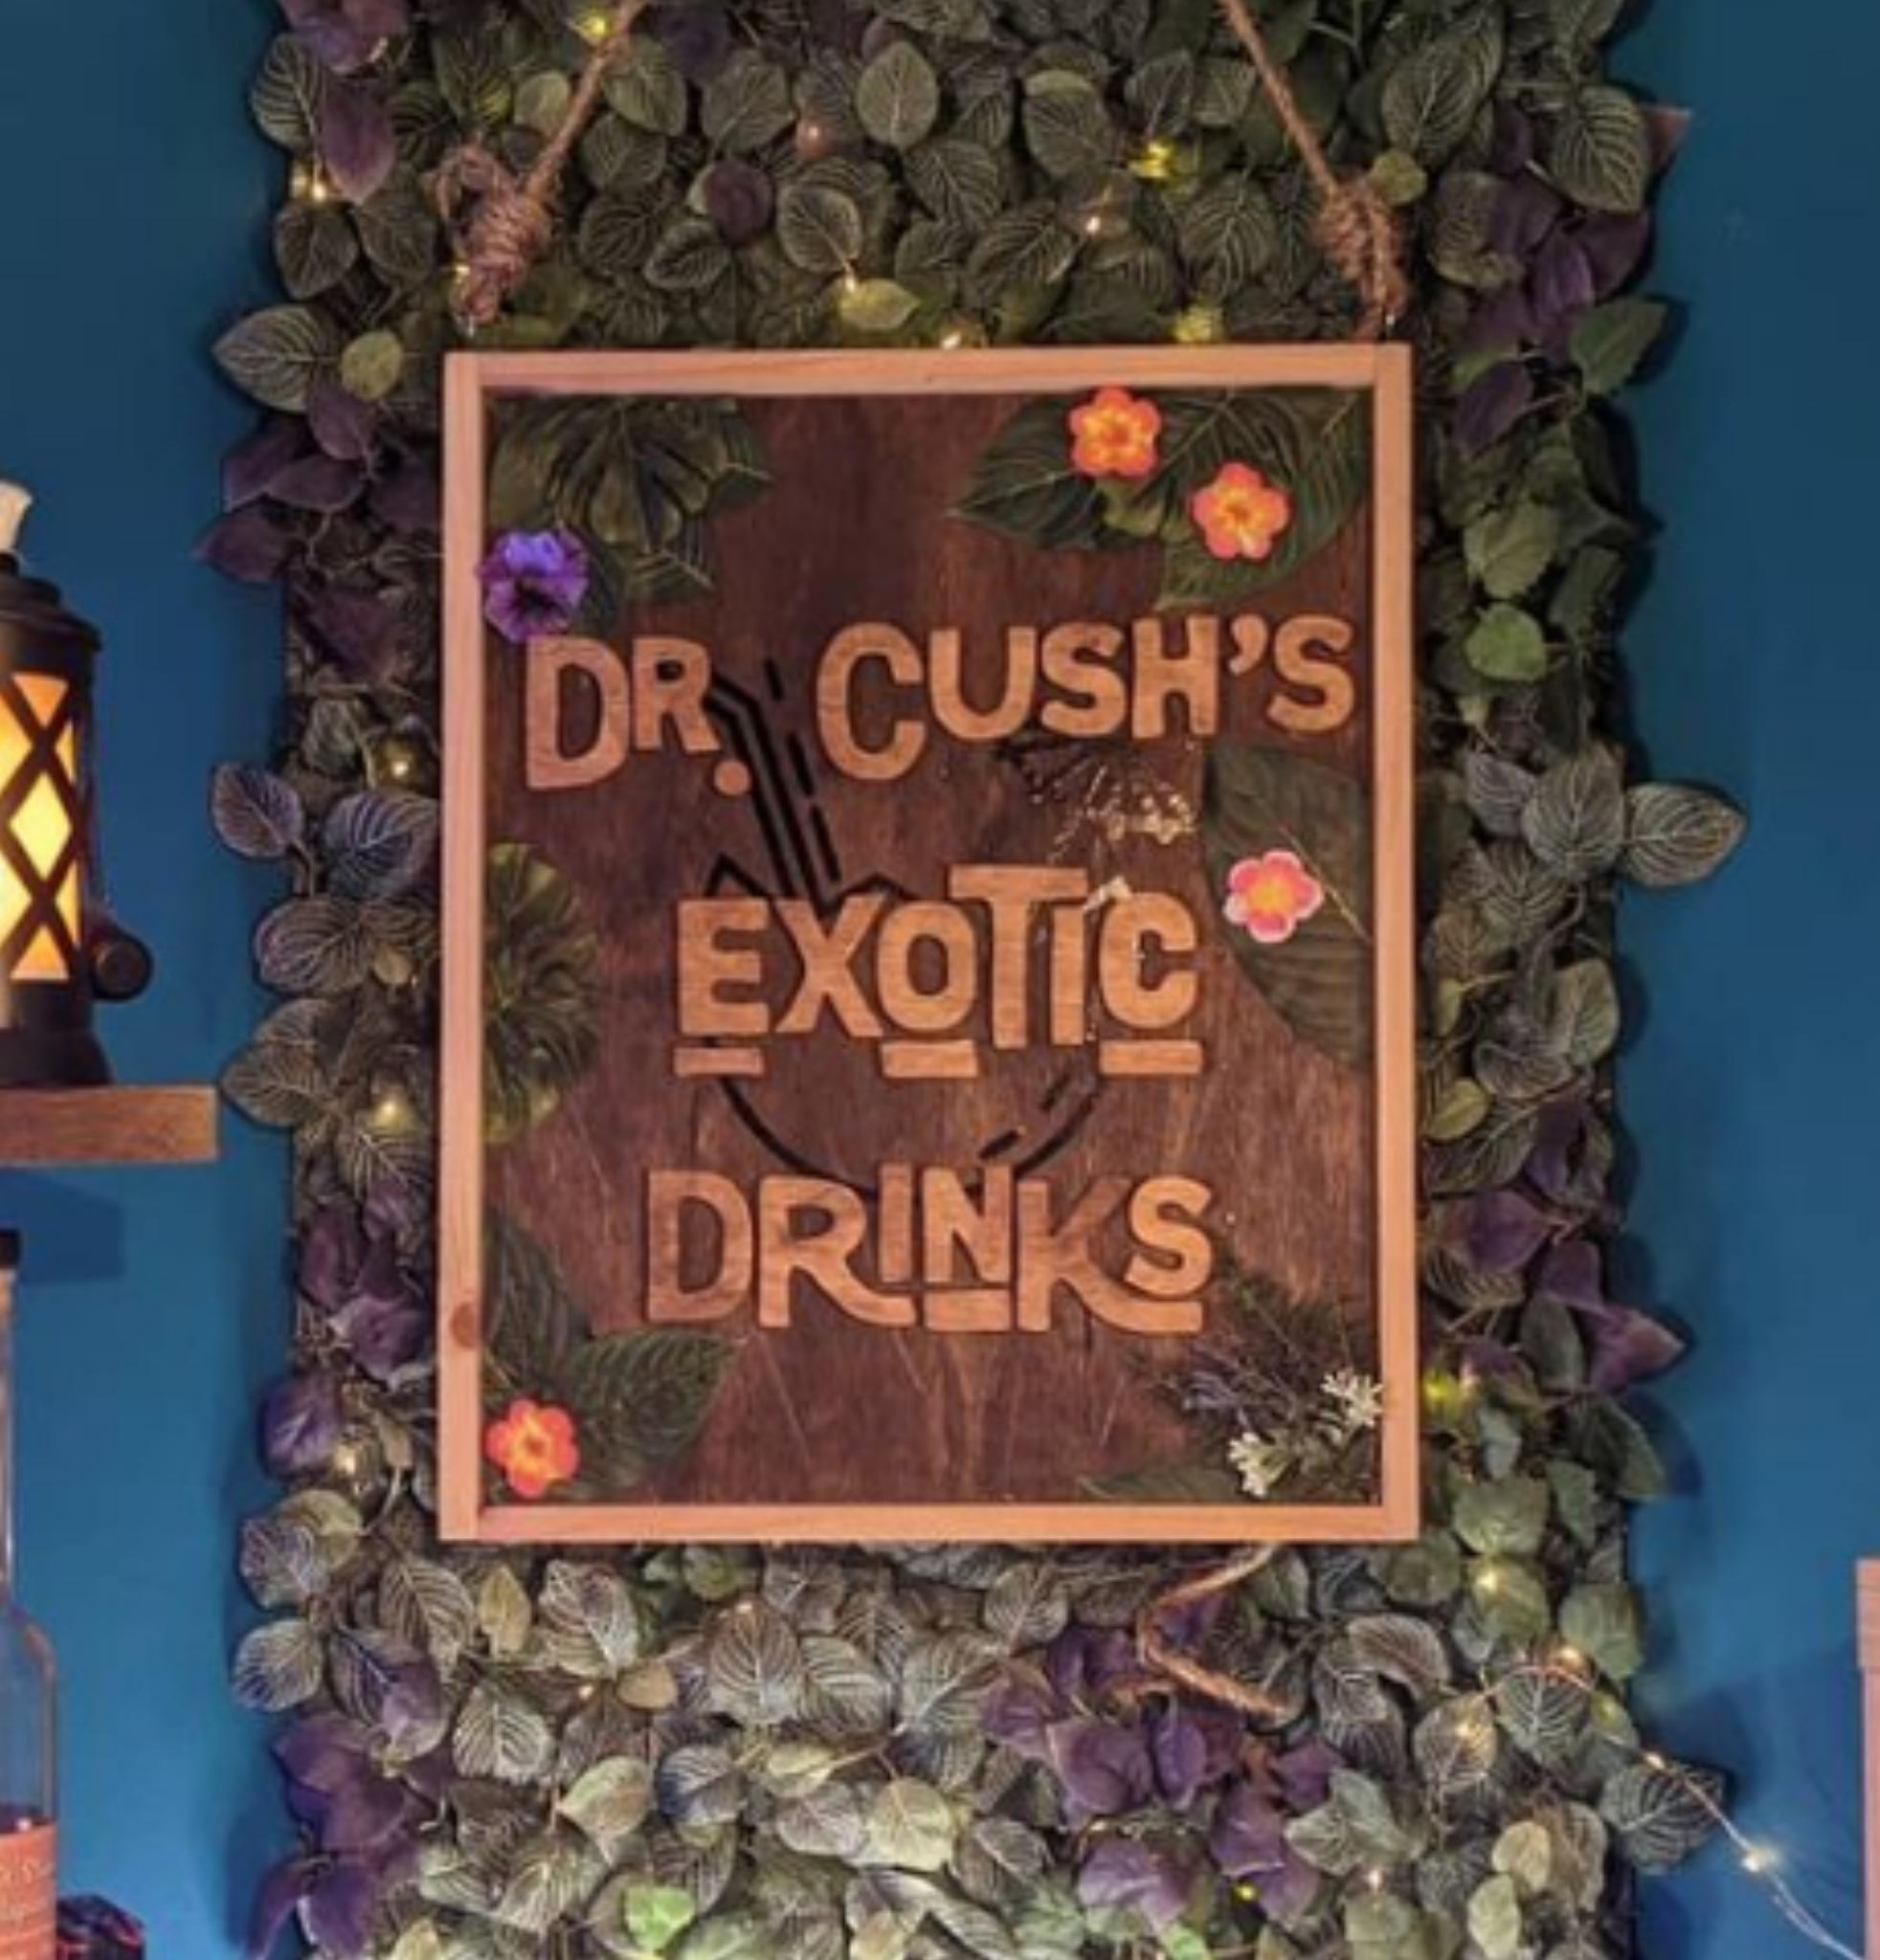 Dr. Cush's Exotic Drinks